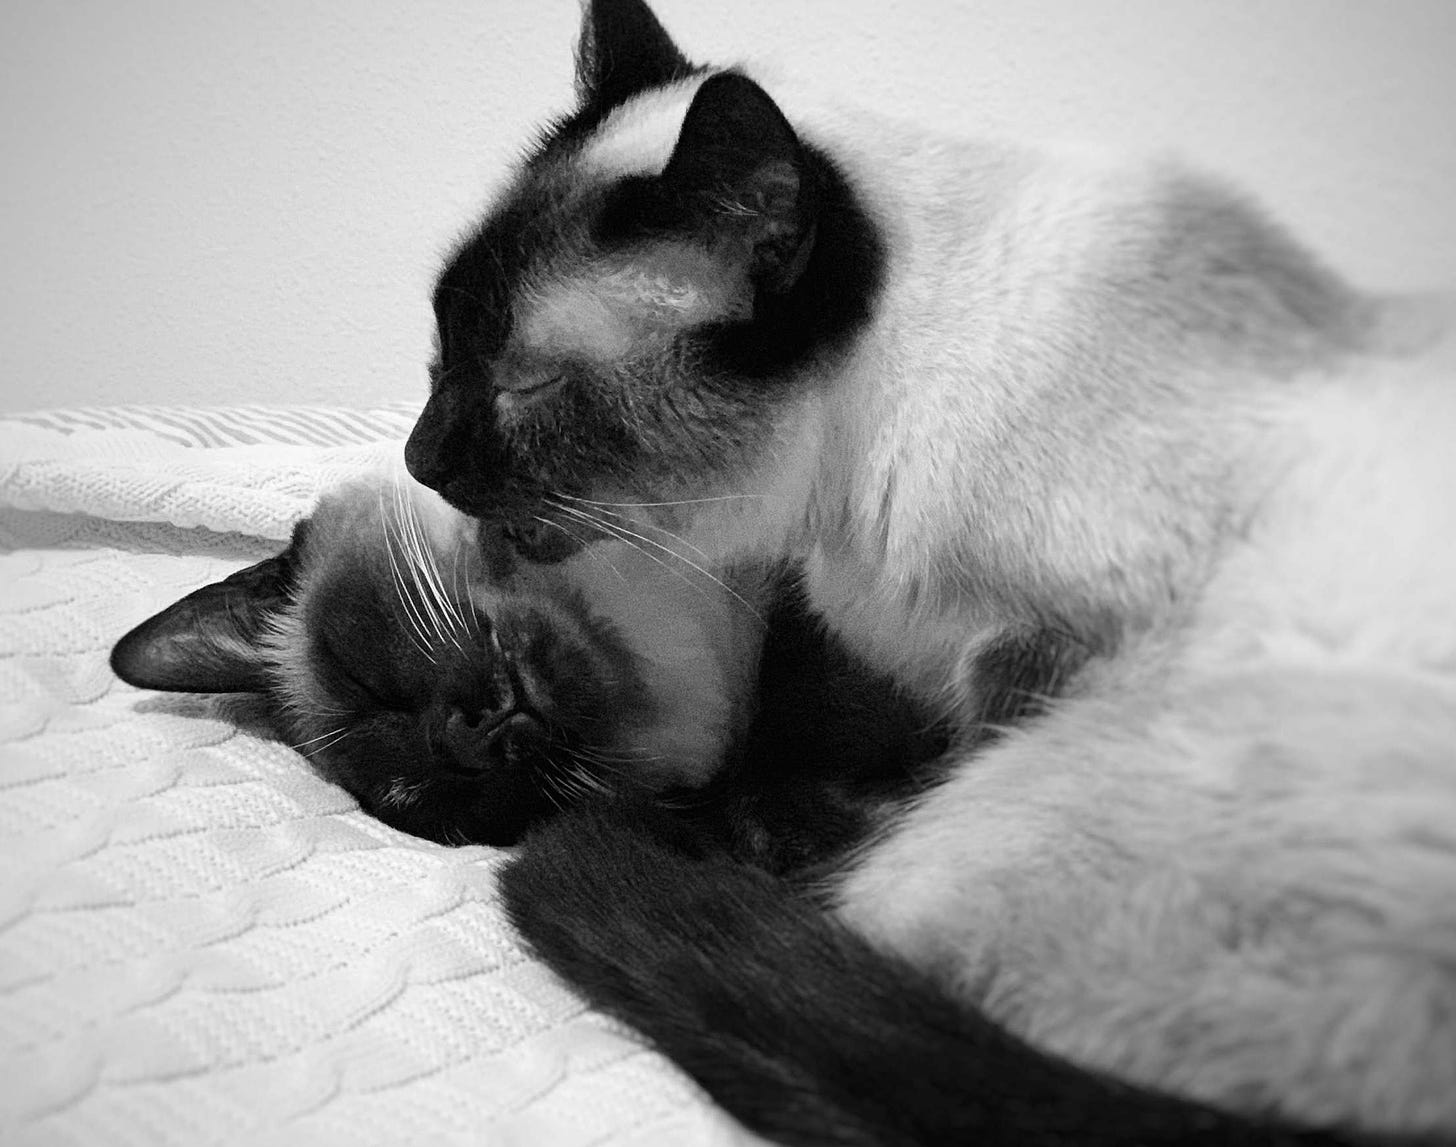 One Siamese cat snuggling with another Siamese cat while licking her